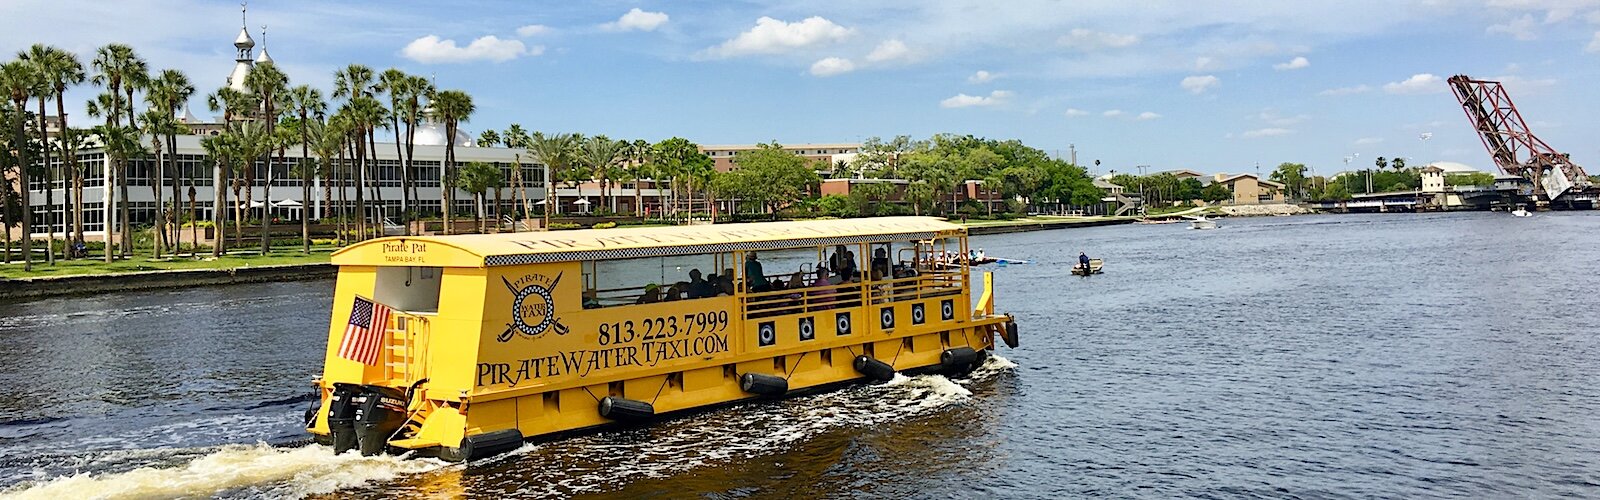 Passengers ride Pirate Water Taxis along the Hillsborough River through downtown Tampa and around the surrounding bays. 